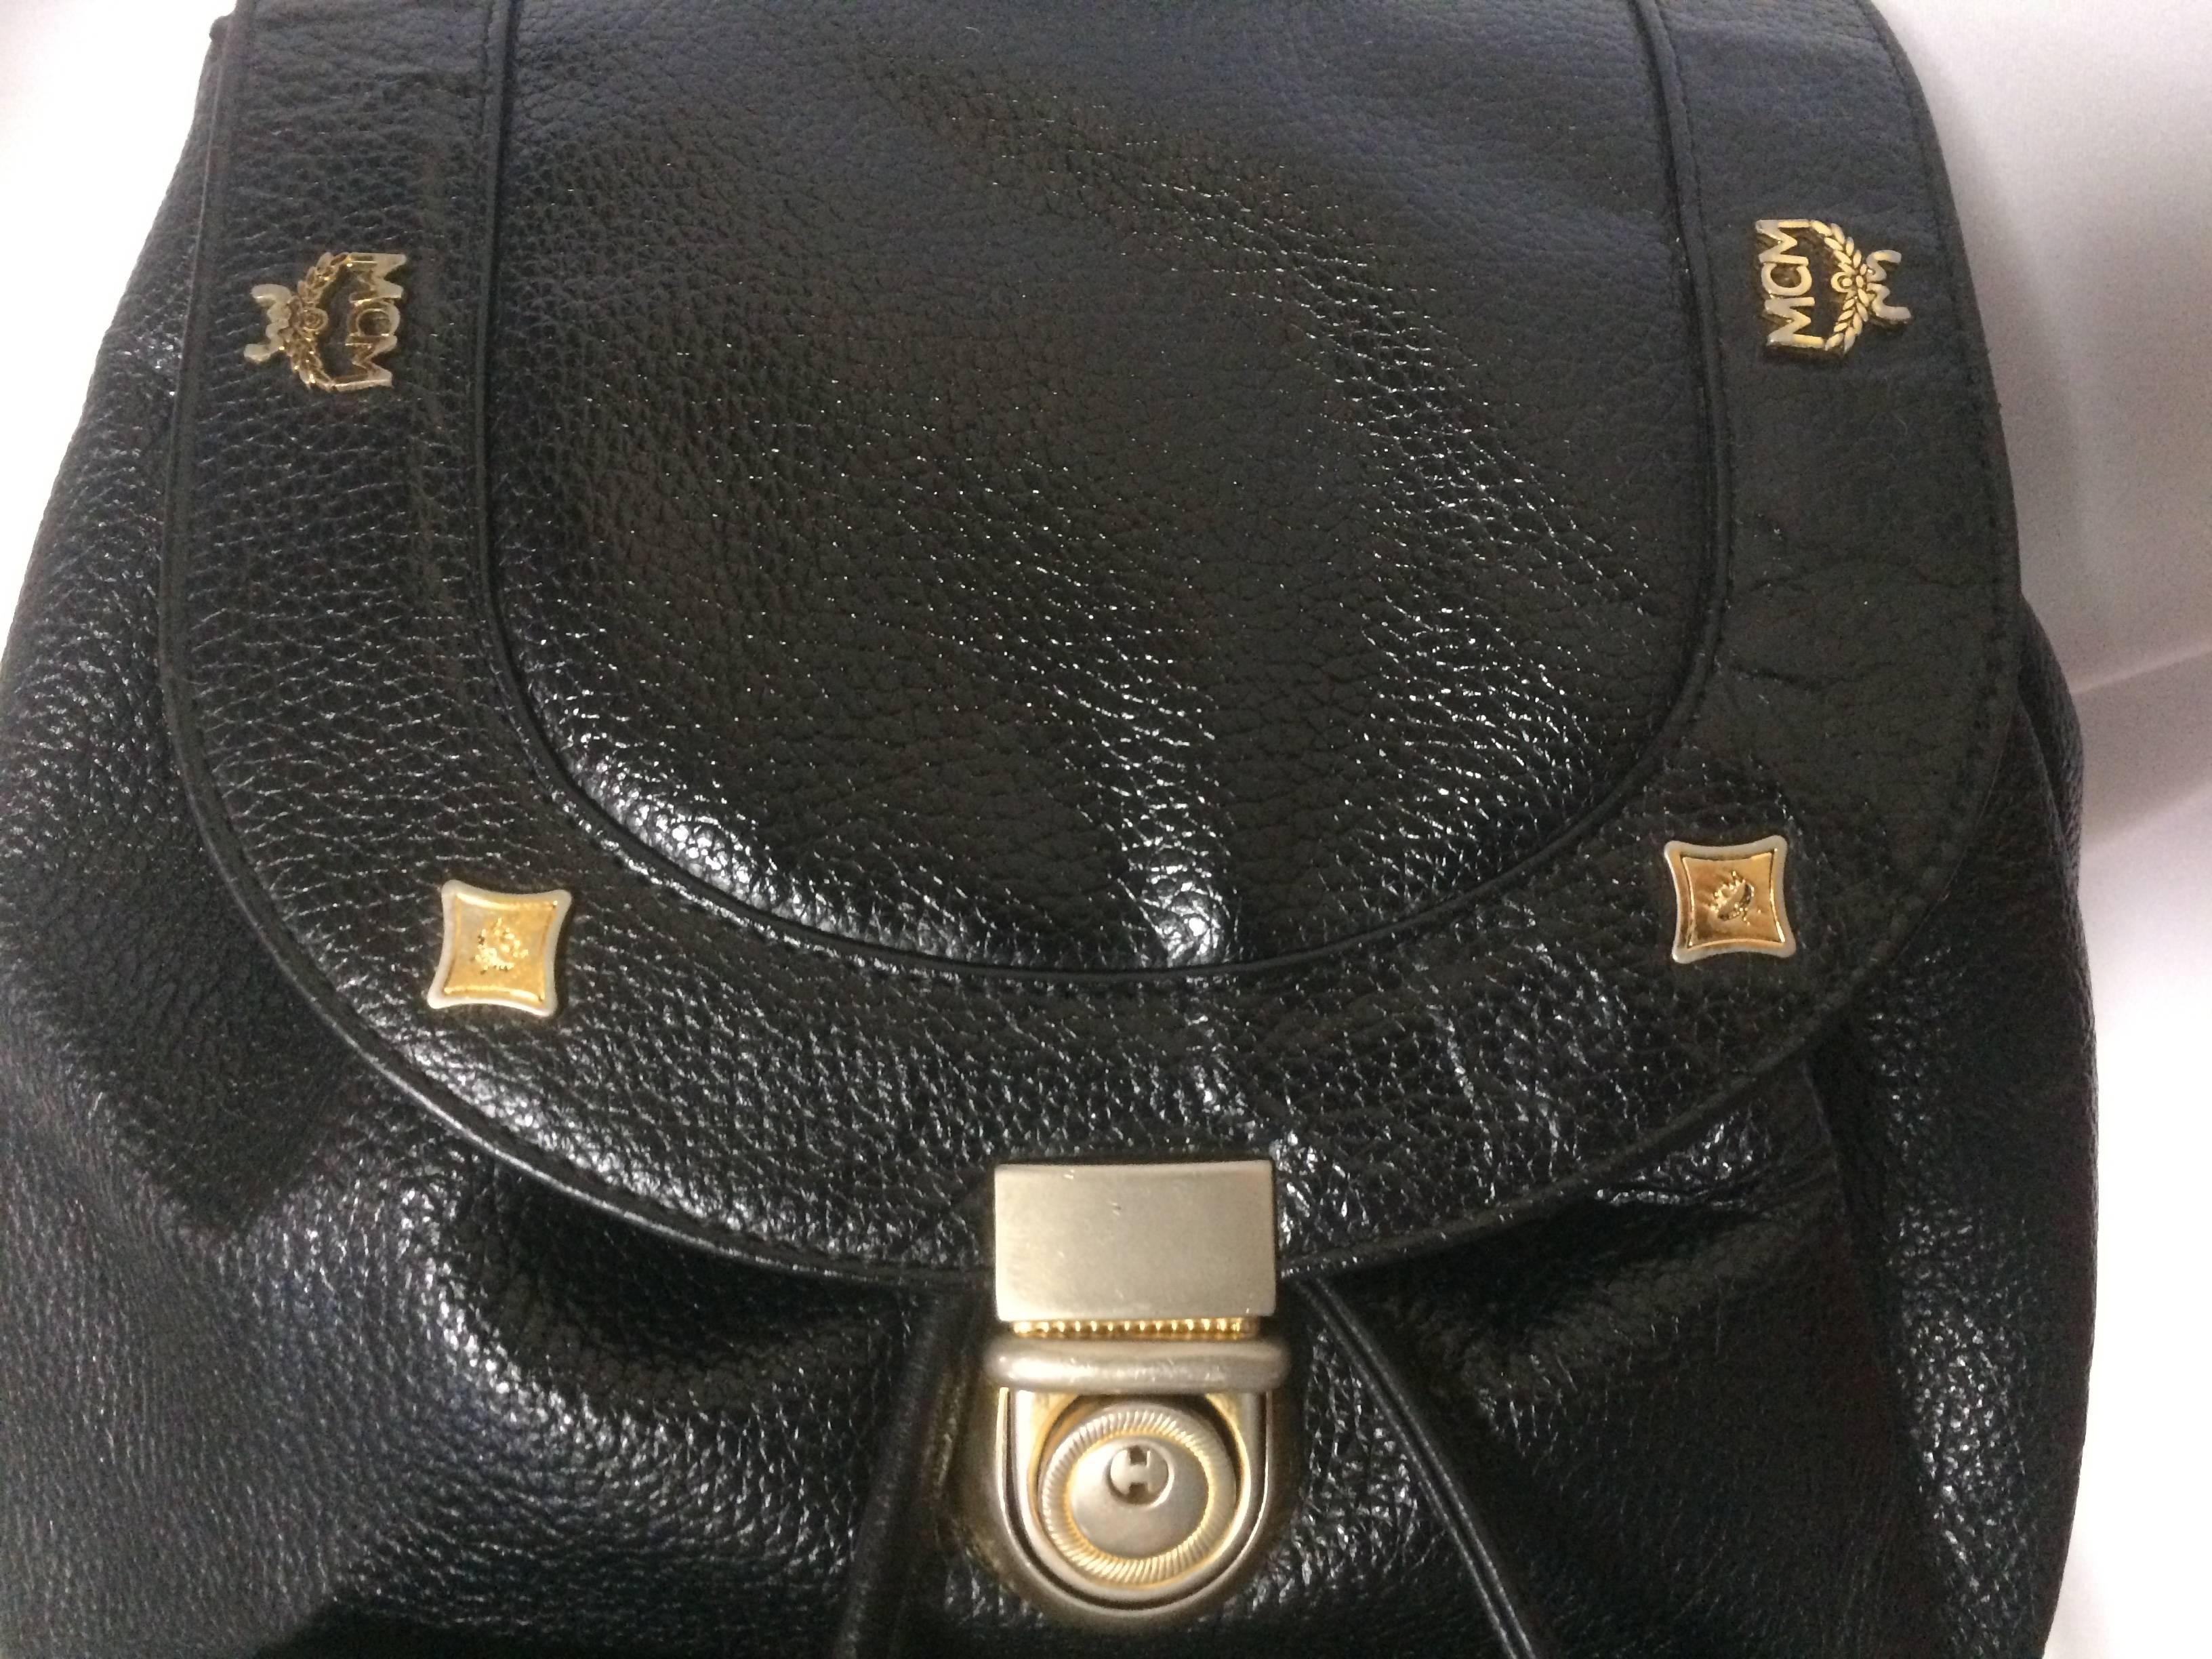 1980s. Vintage MCM genuine leather black backpack with golden studded logo motifs. Designed by Michael Cromer. Unisex bag for daily use.

MCM has now come back in trend and so hot in the market!!

This is the vintage MCM black genuine leather